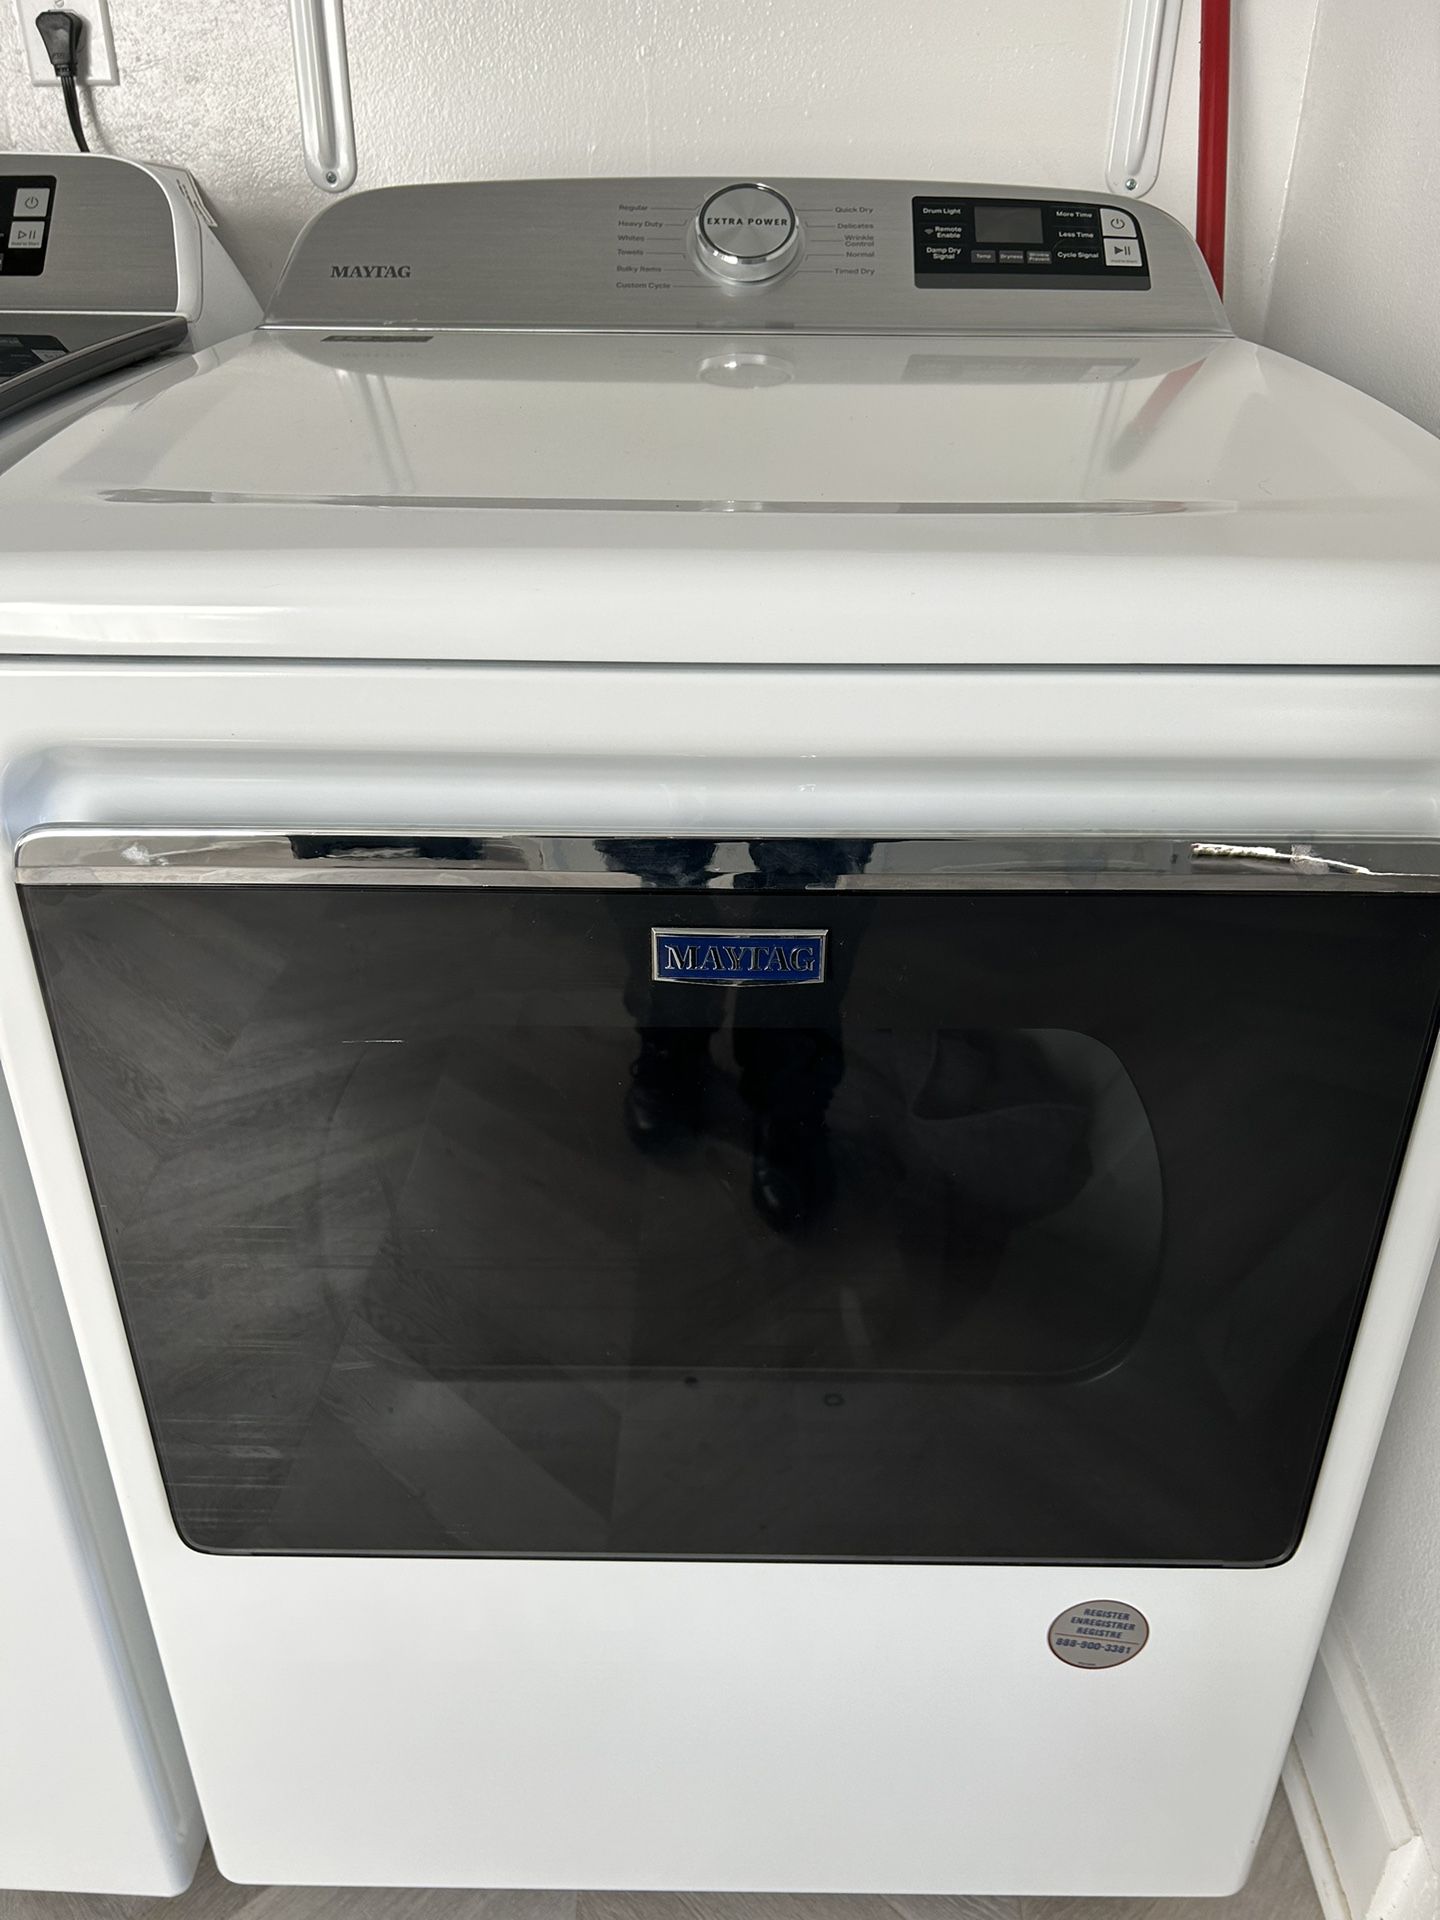 Maytag Dryer Washer Unit. Six Months Old. 